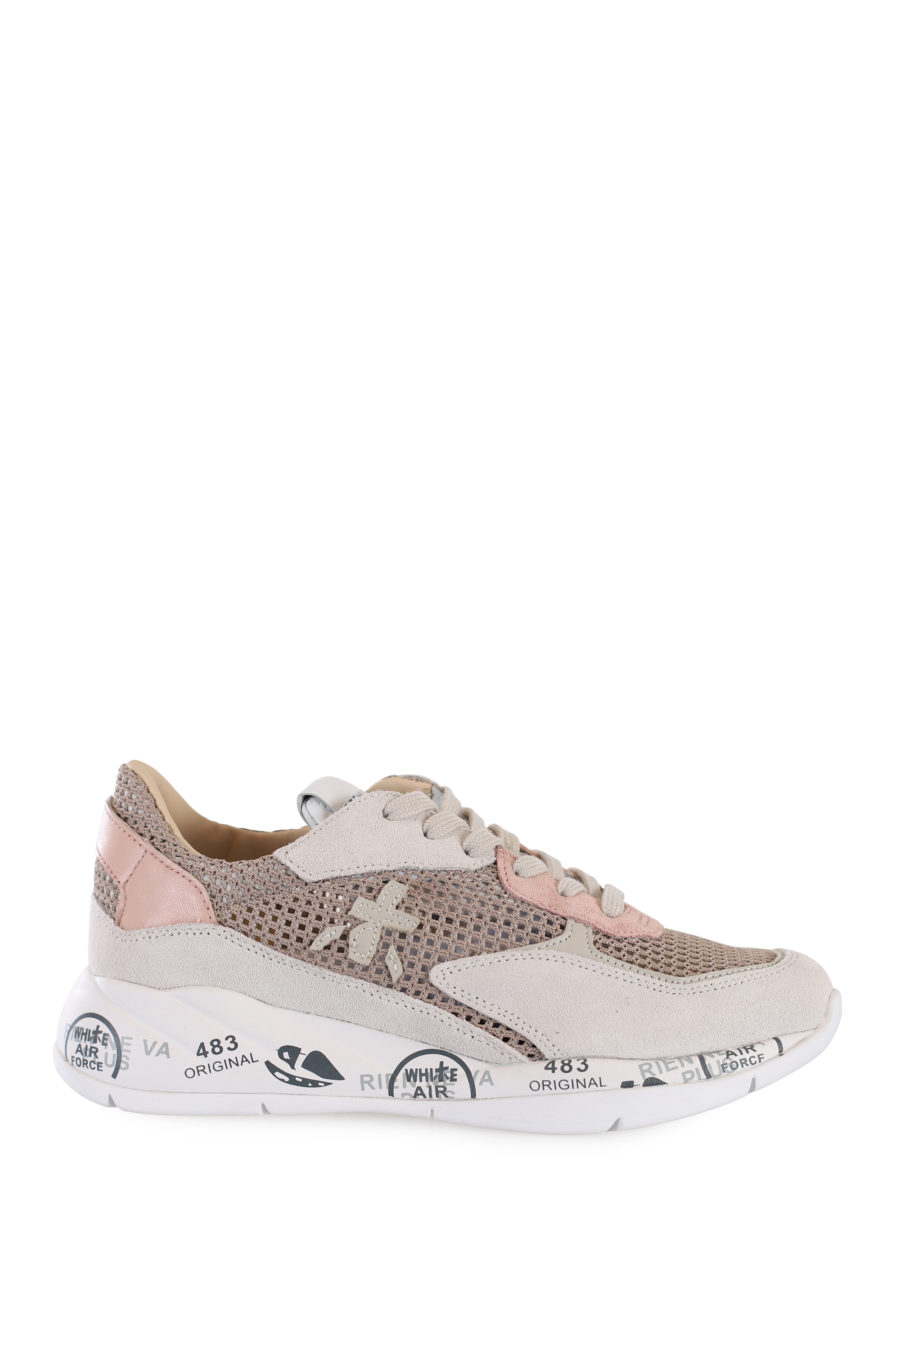 Earth coloured trainers with pink details in openwork fabric - IMG 1690